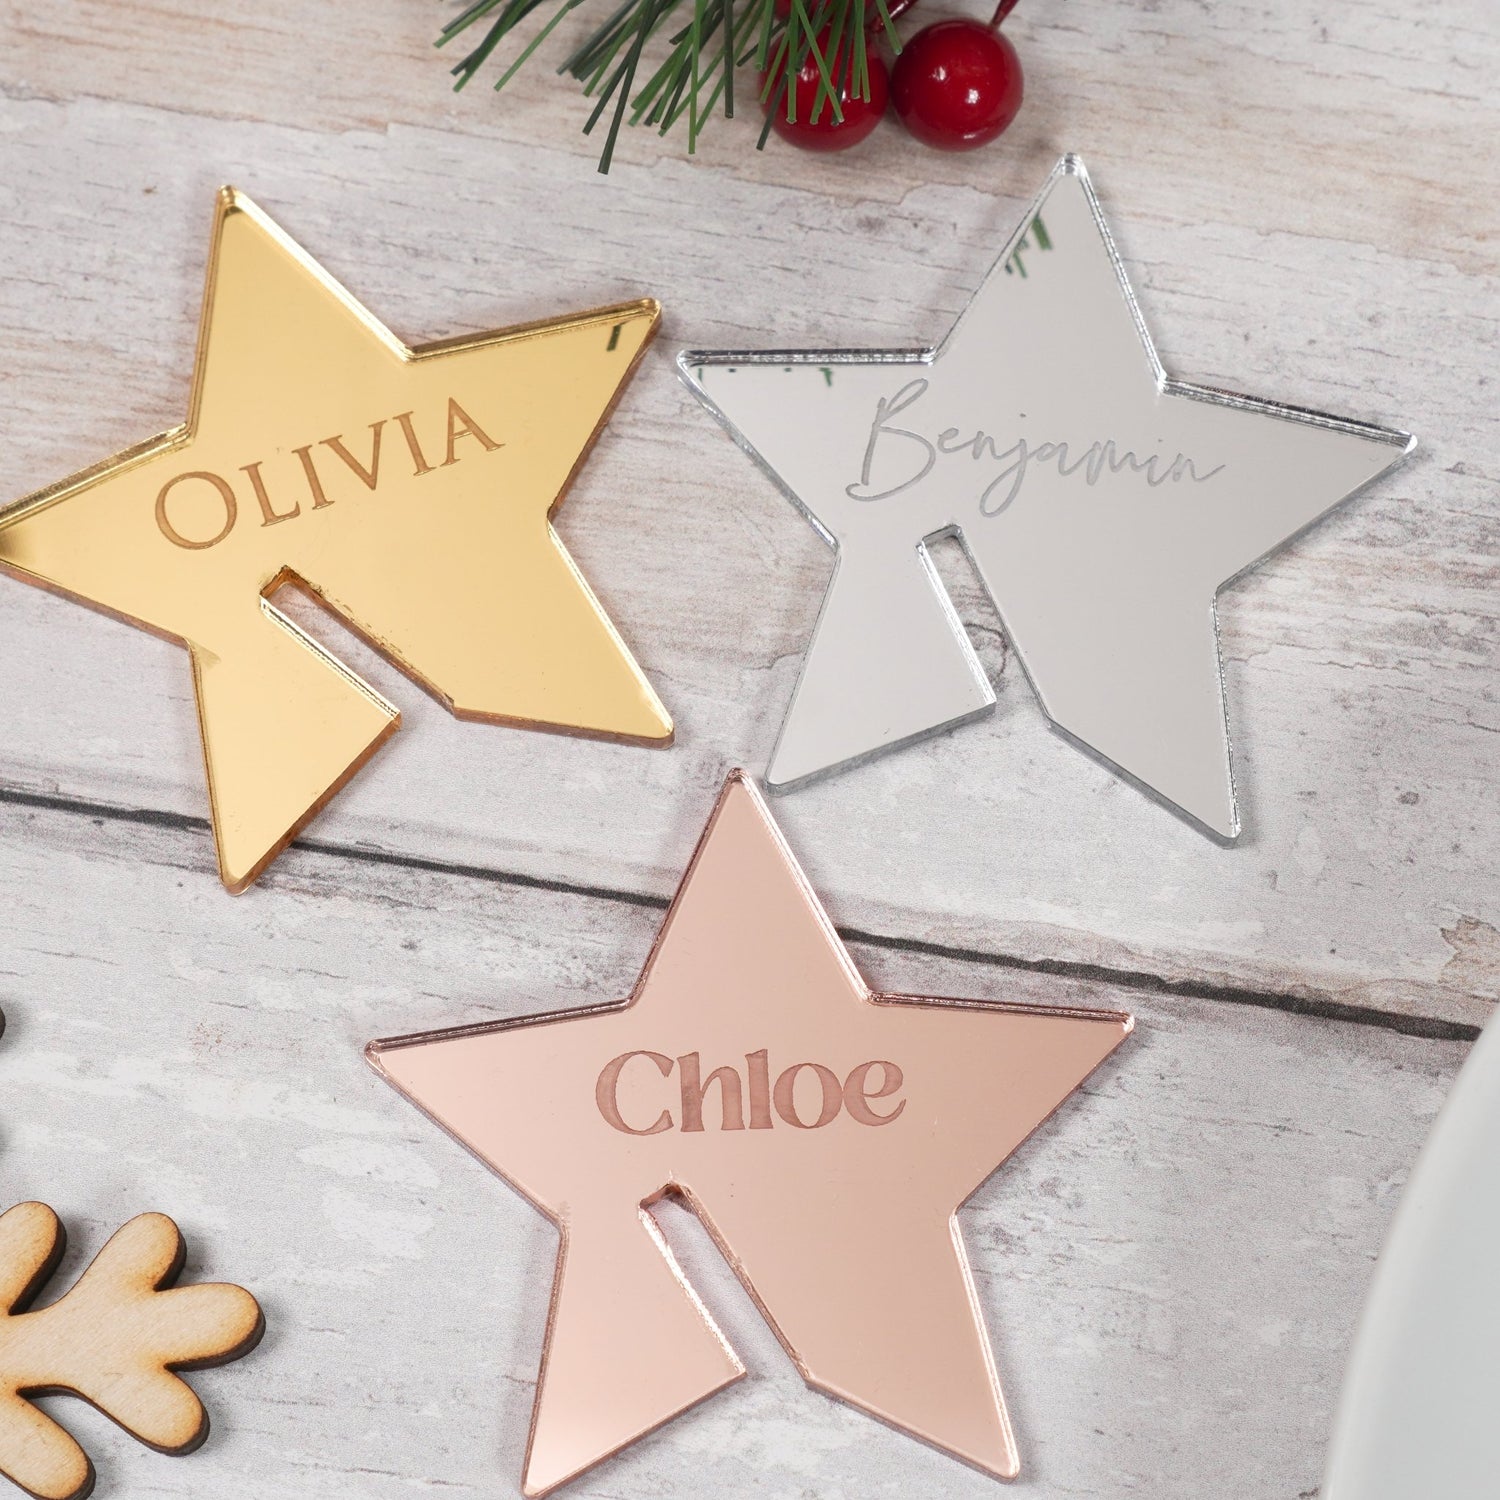 Personalised Christmas table decorations